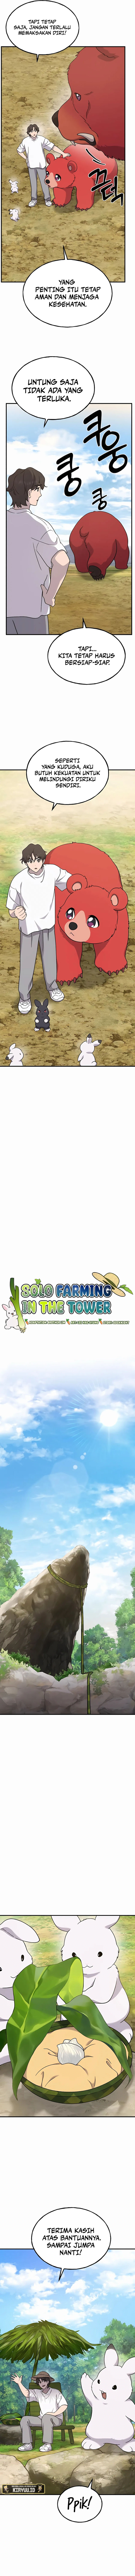 Solo Farming In The Tower Chapter 35